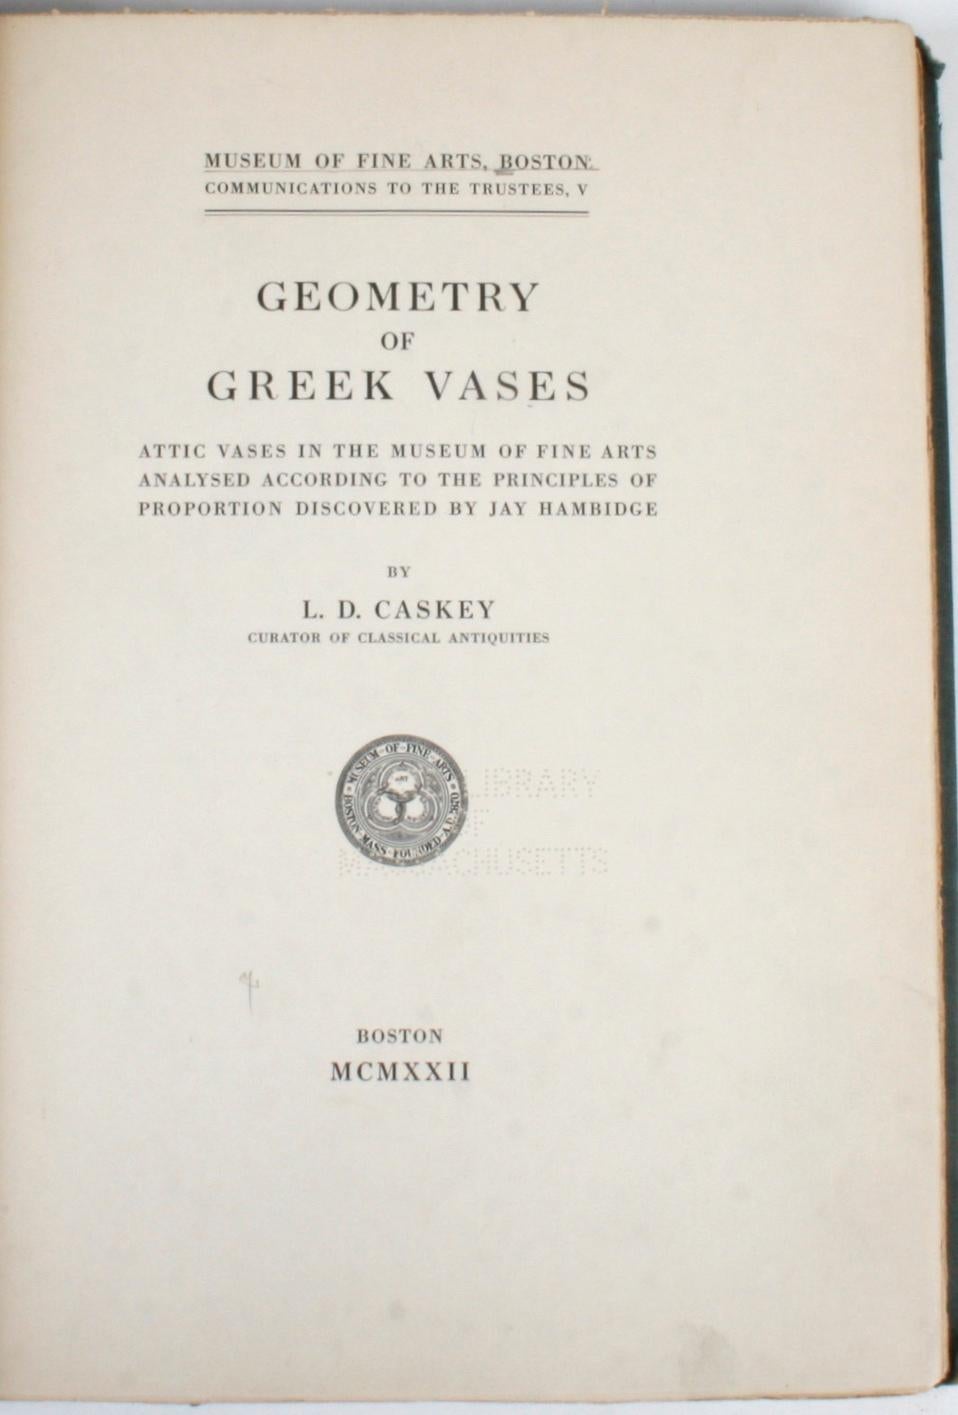 Geometry of Greek Vases, Attic Vases in the Museum of Fine Arts Analysed According to the Principles of Proportion Discovered by Jay Hambidge. Boston: Museum of Fine Arts, Boston, 1922. Hardcover with no dust jacket. 235 pp. A fascinating book that